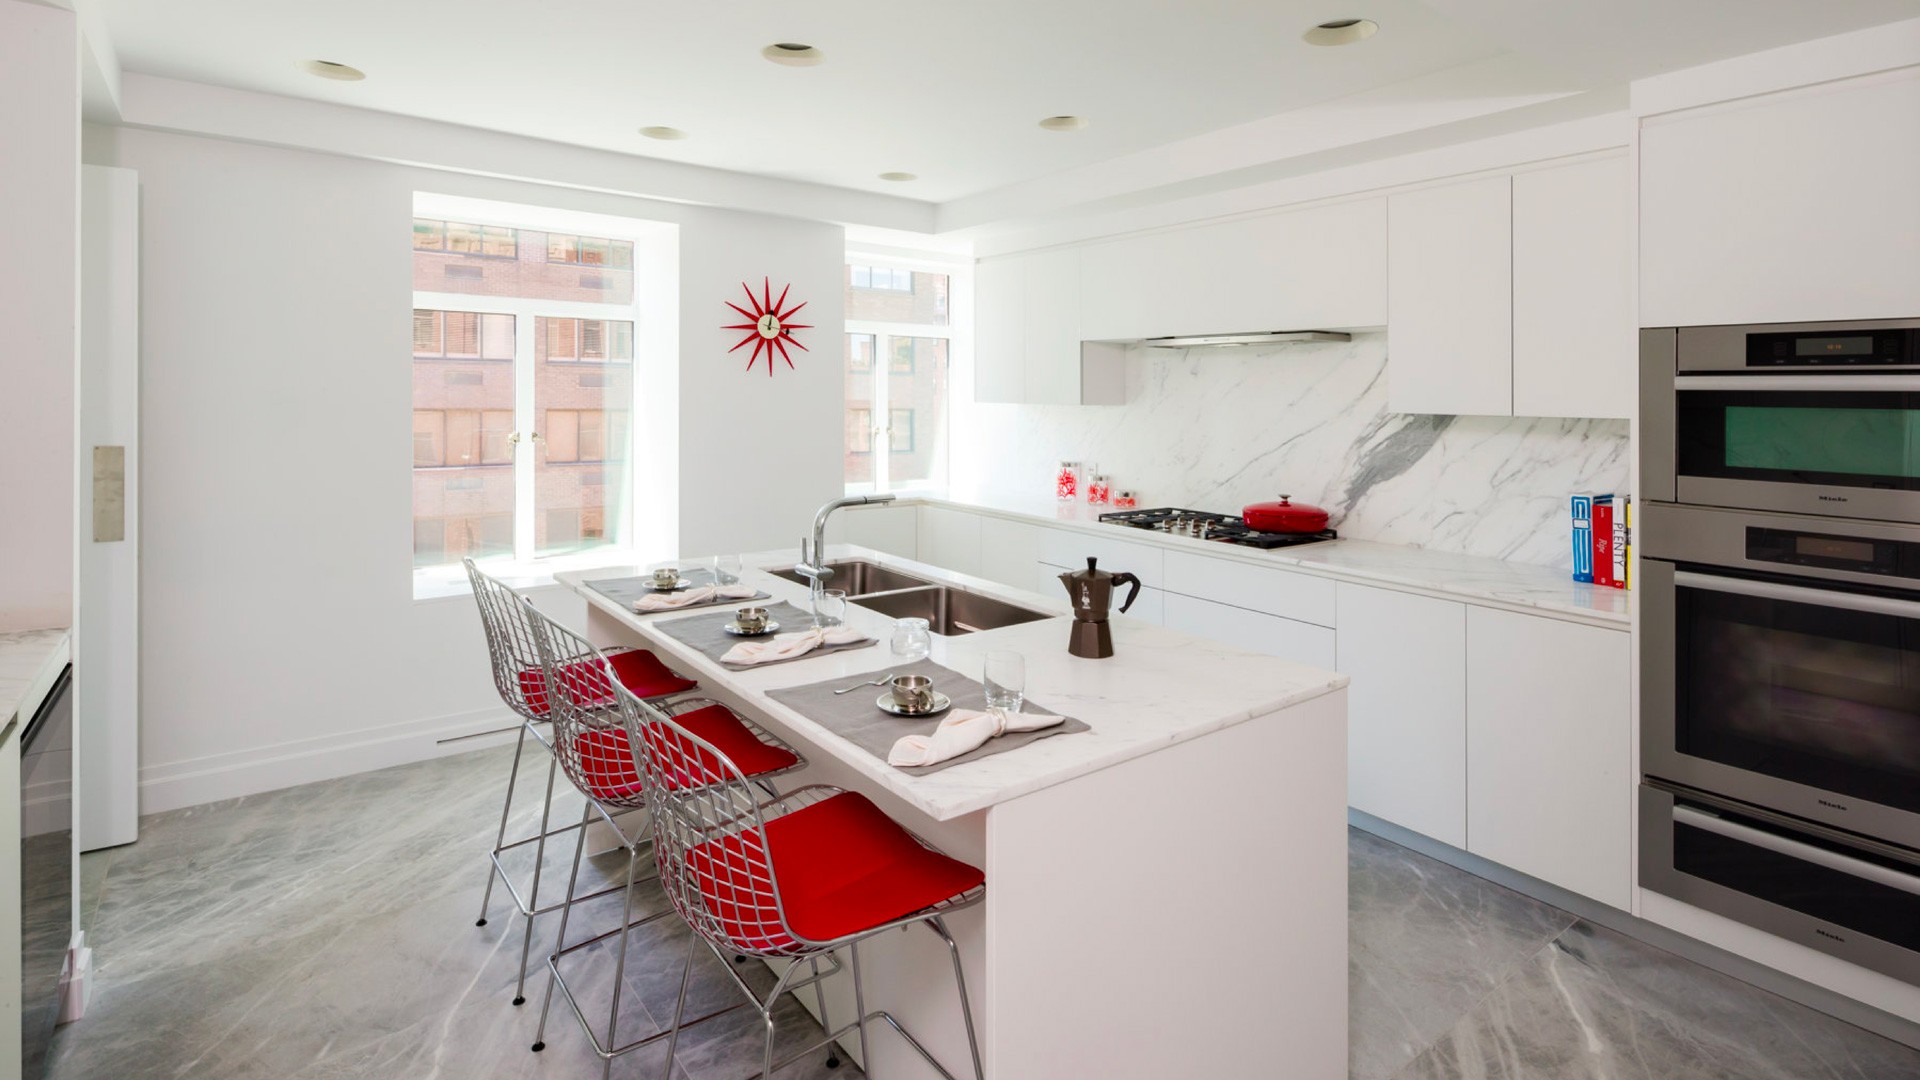 Poliform_contract_residential_737_PARK_AVENUE_05_1920x1080px_gallery